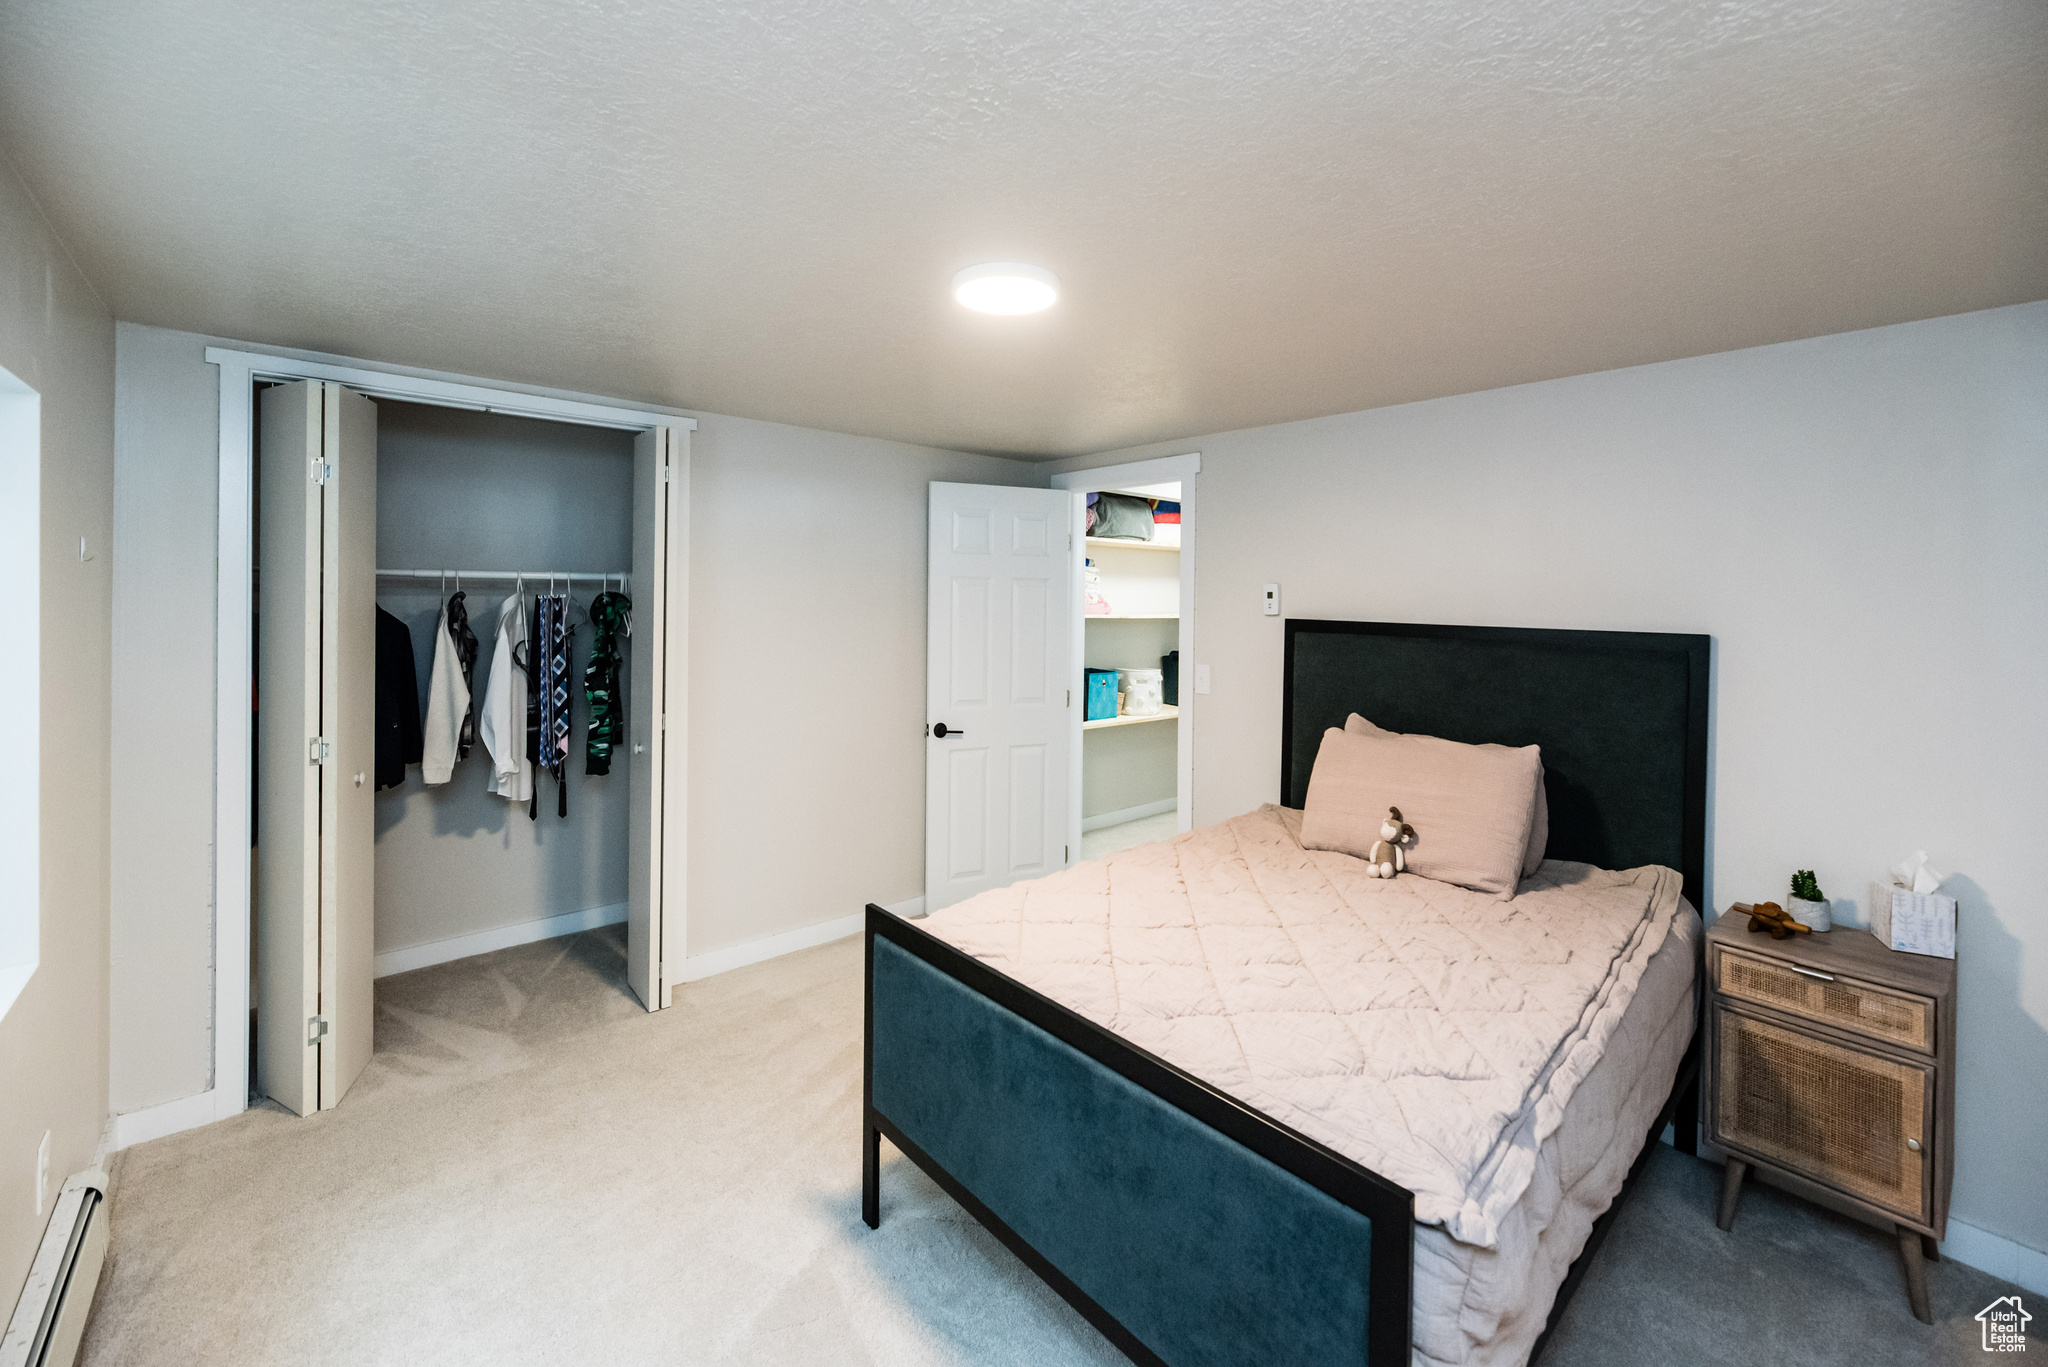 Carpeted bedroom with a closet, a baseboard heating unit, and a textured ceiling